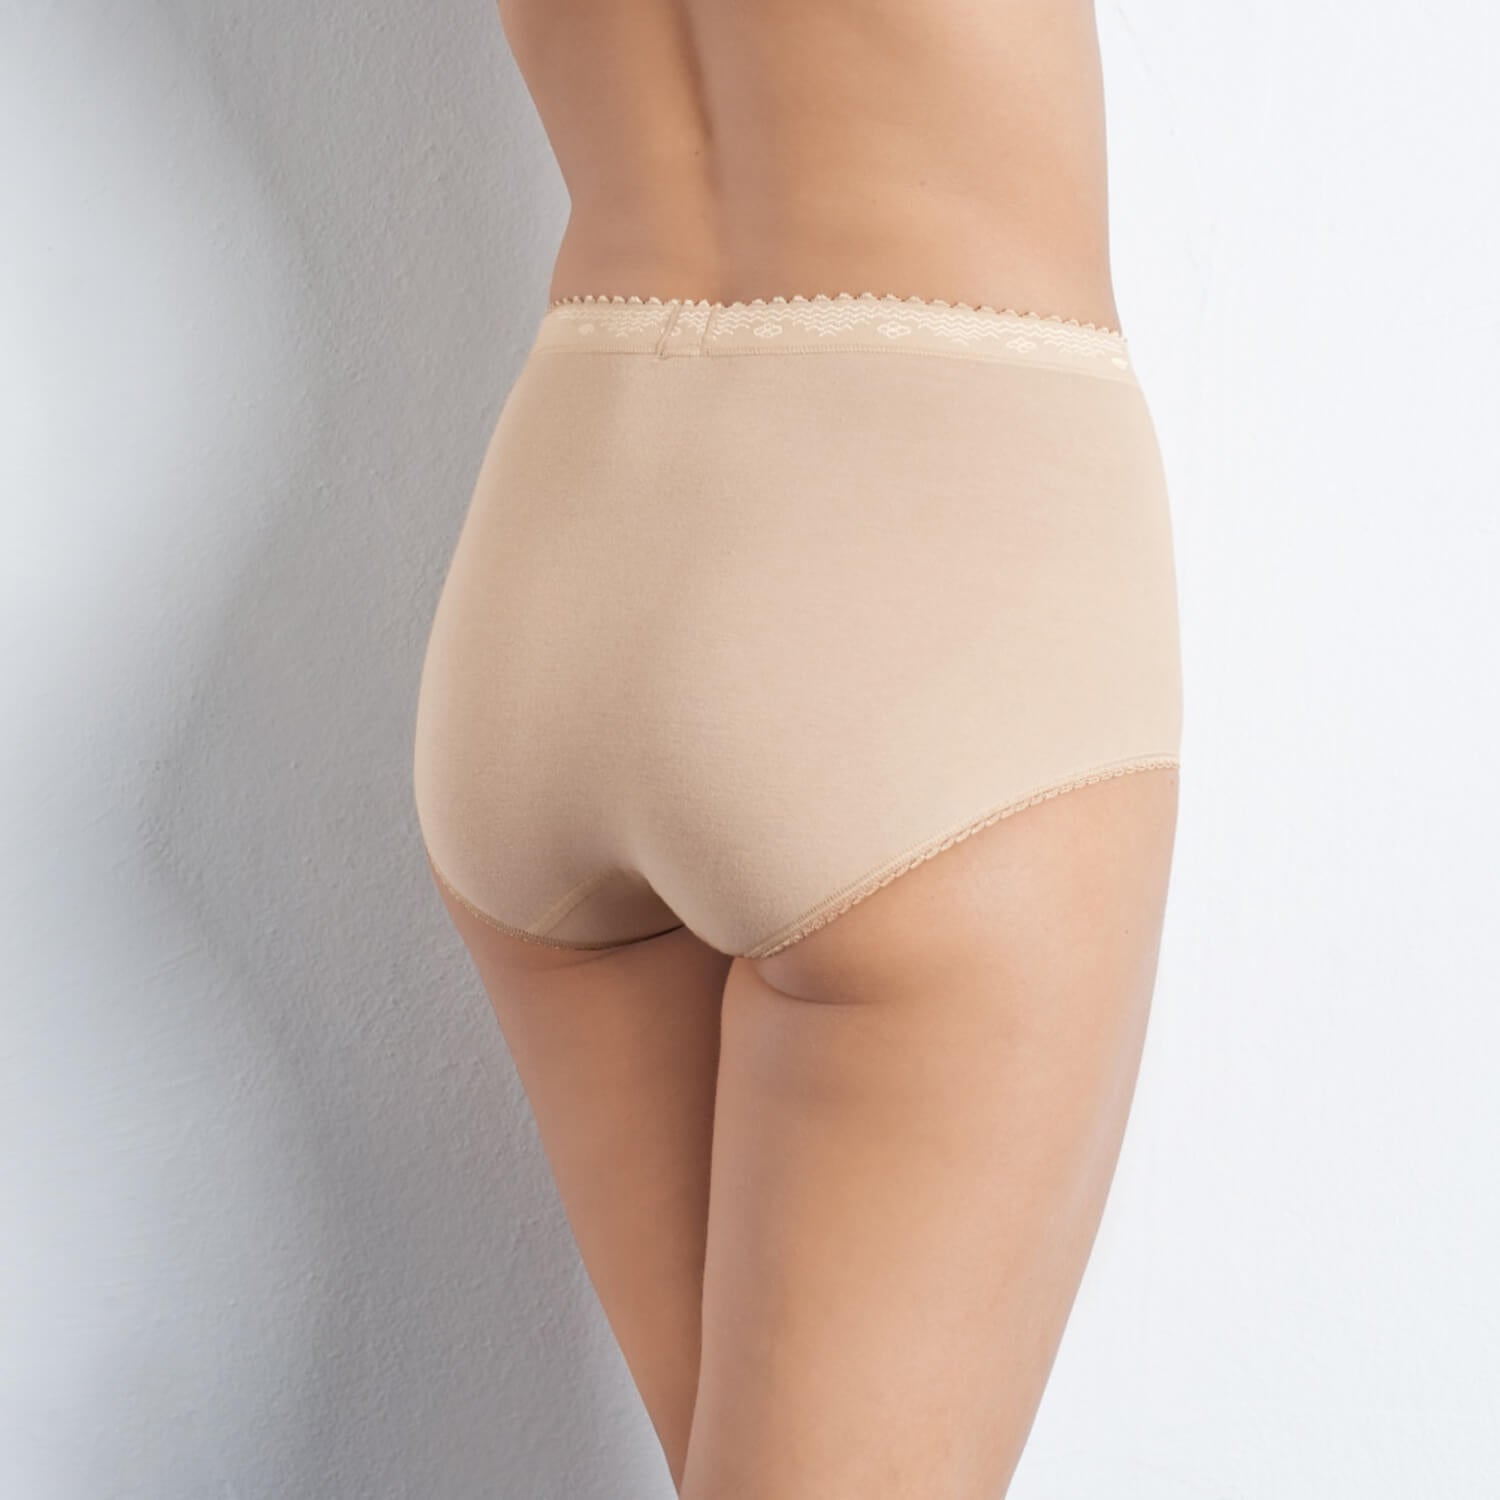 Wacoal Bodysuede Lace Hi-cut Panty Brief Panty in Natural